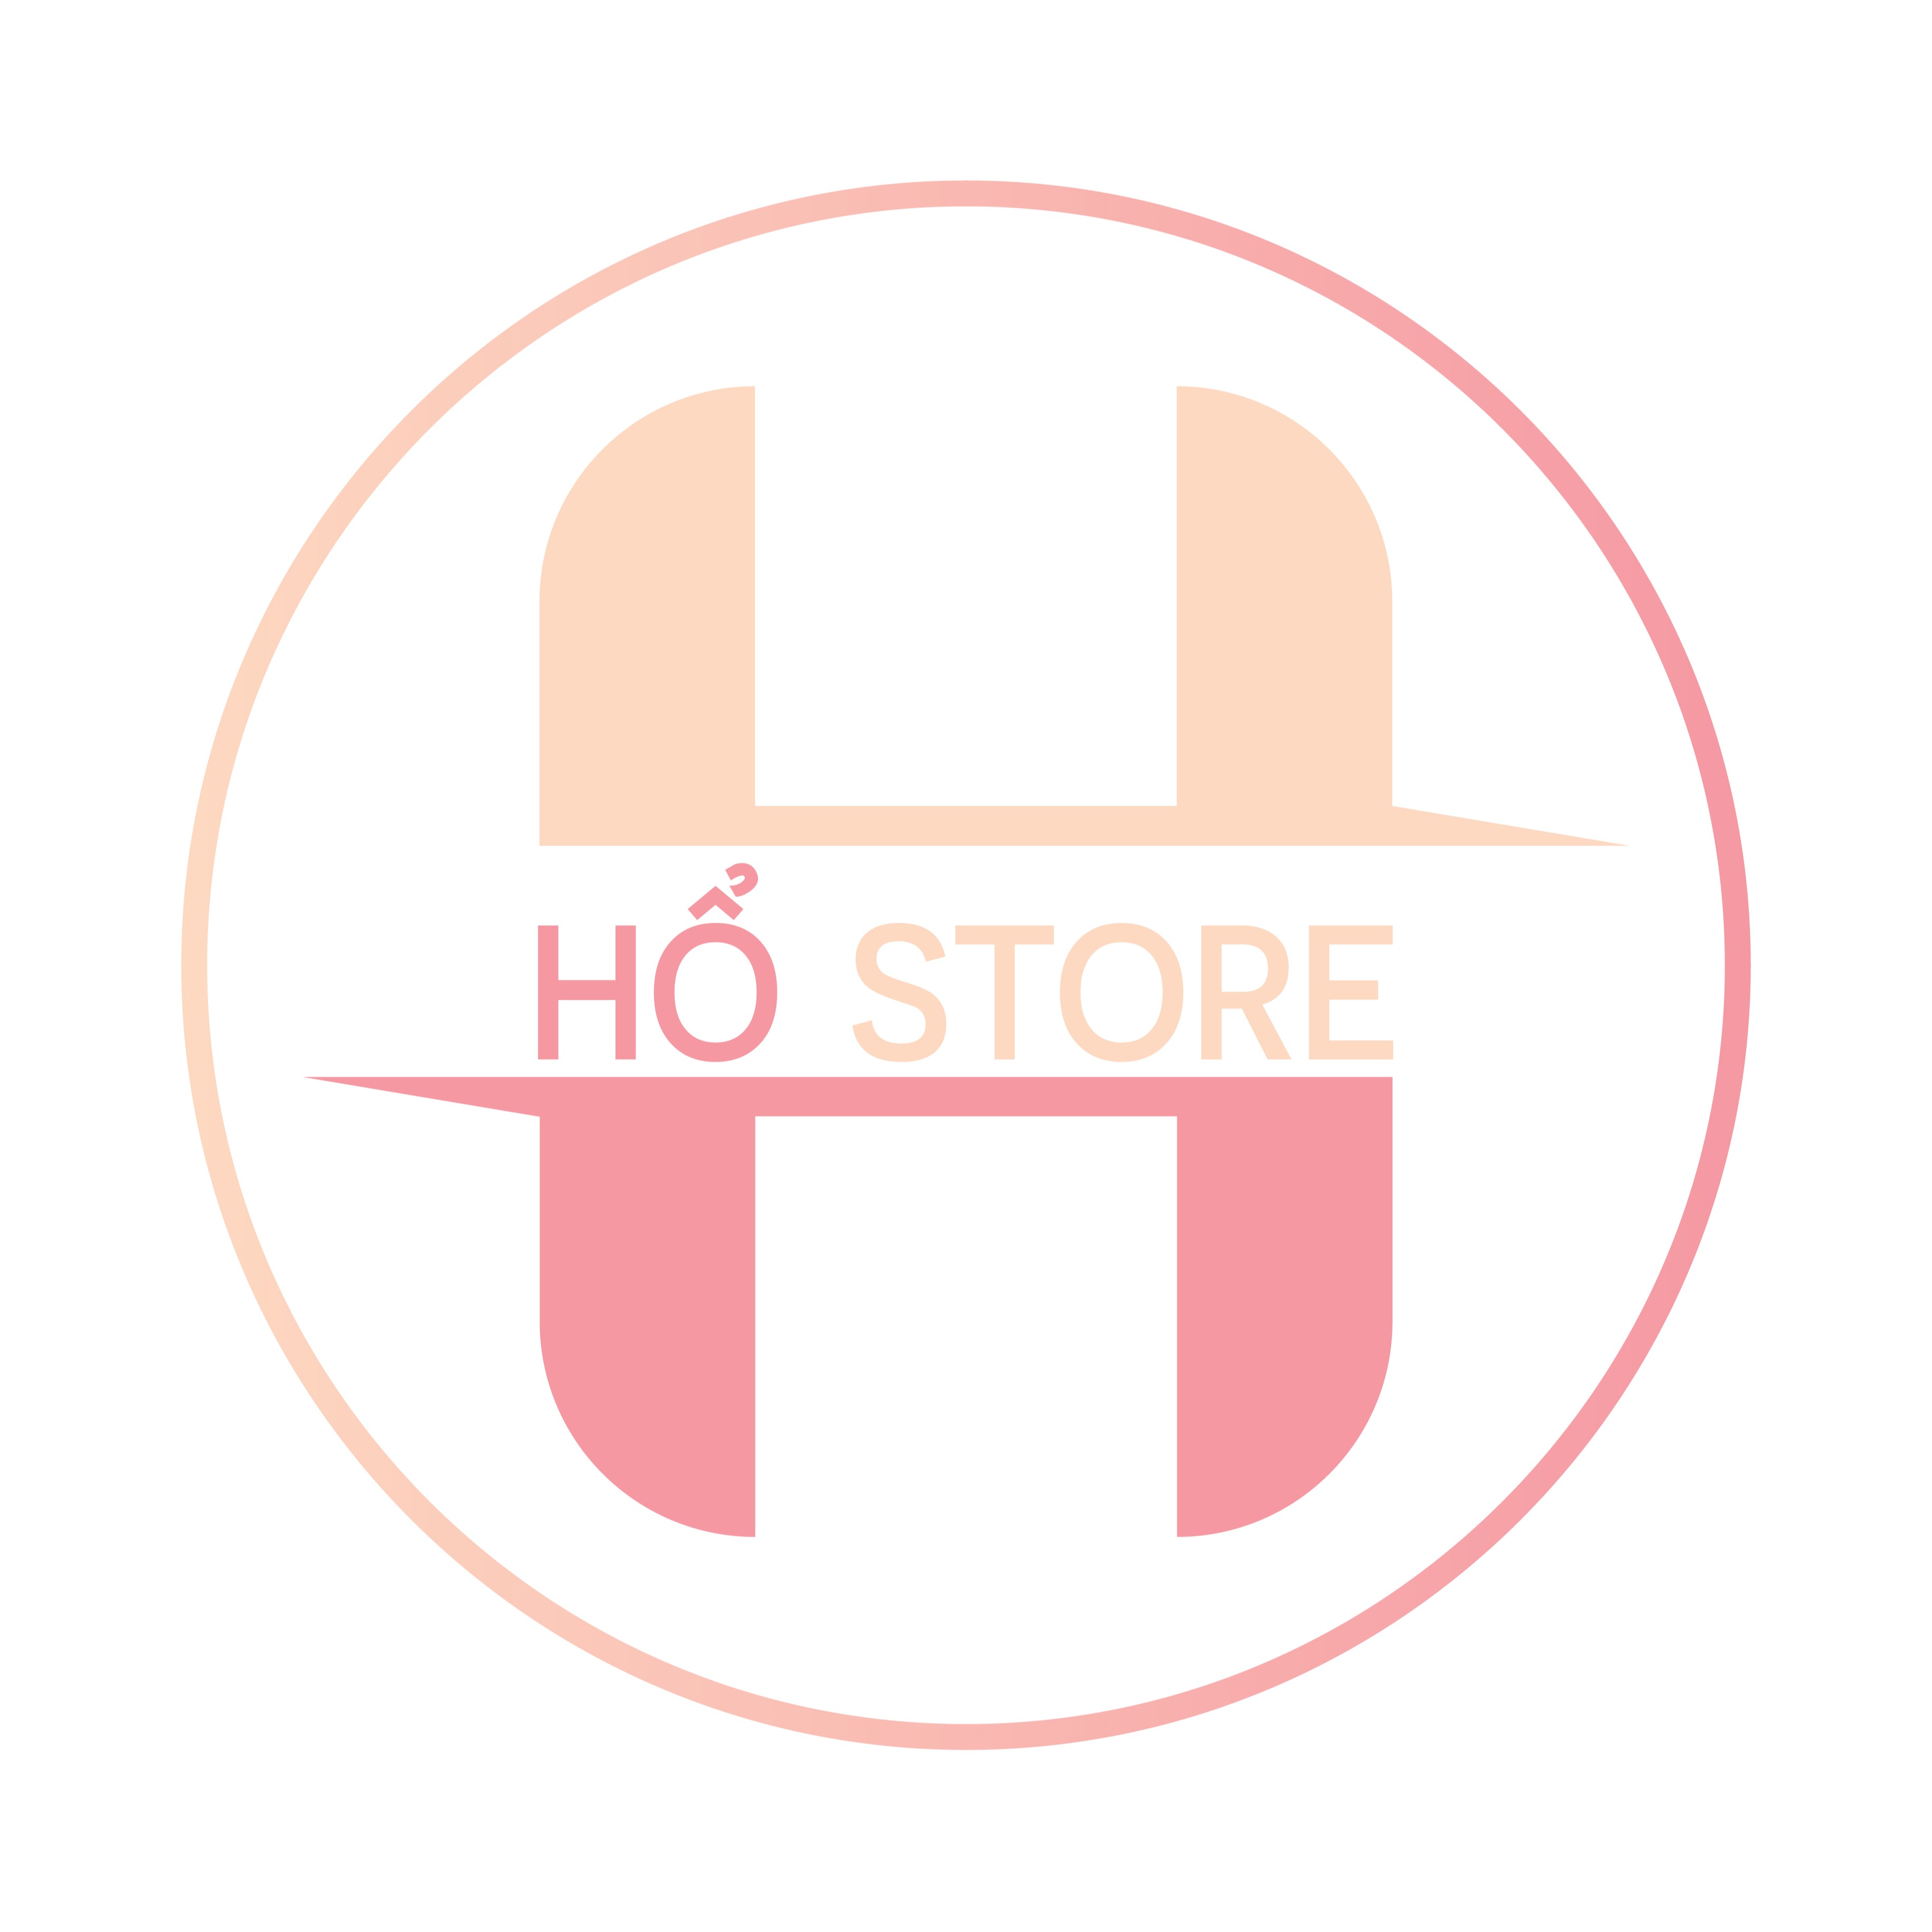 Hổ store79